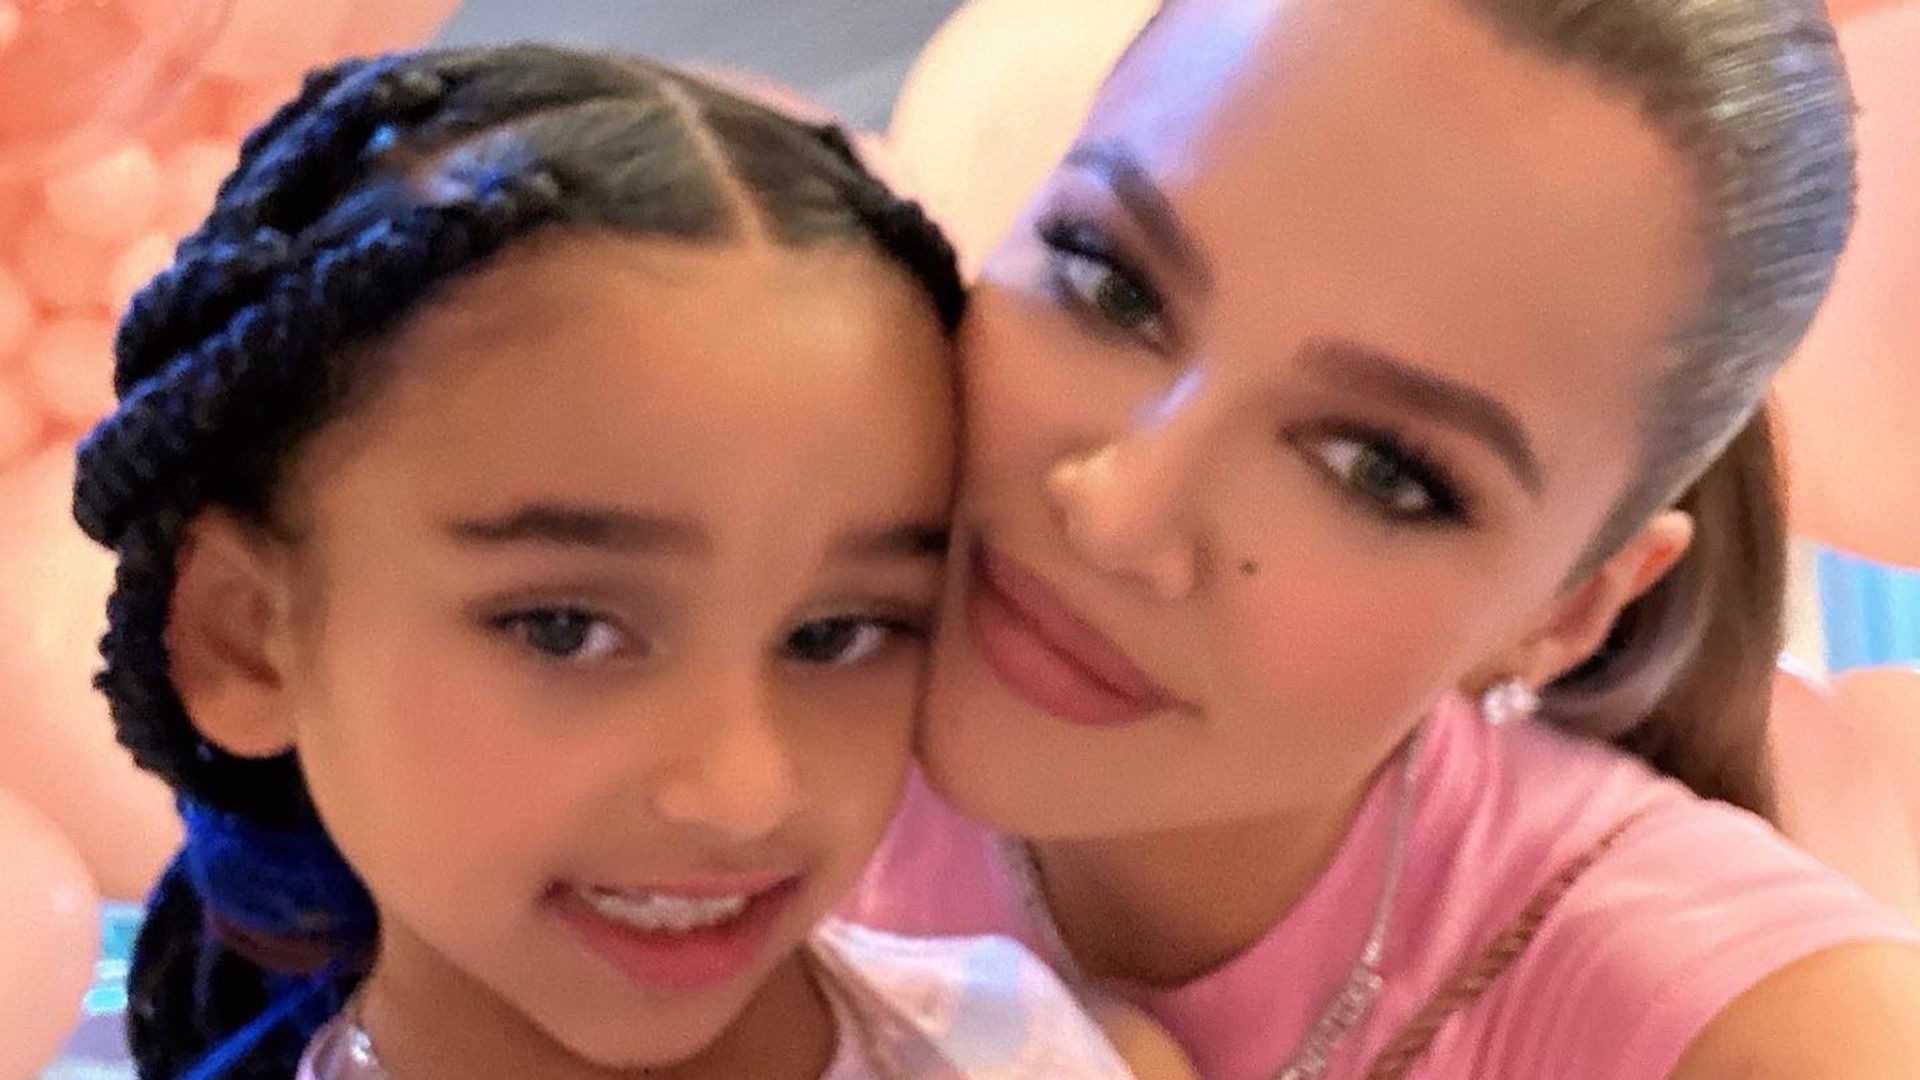 Khloe Kardashian gets fans talking with new photo with niece Dream: 'Best second mom'